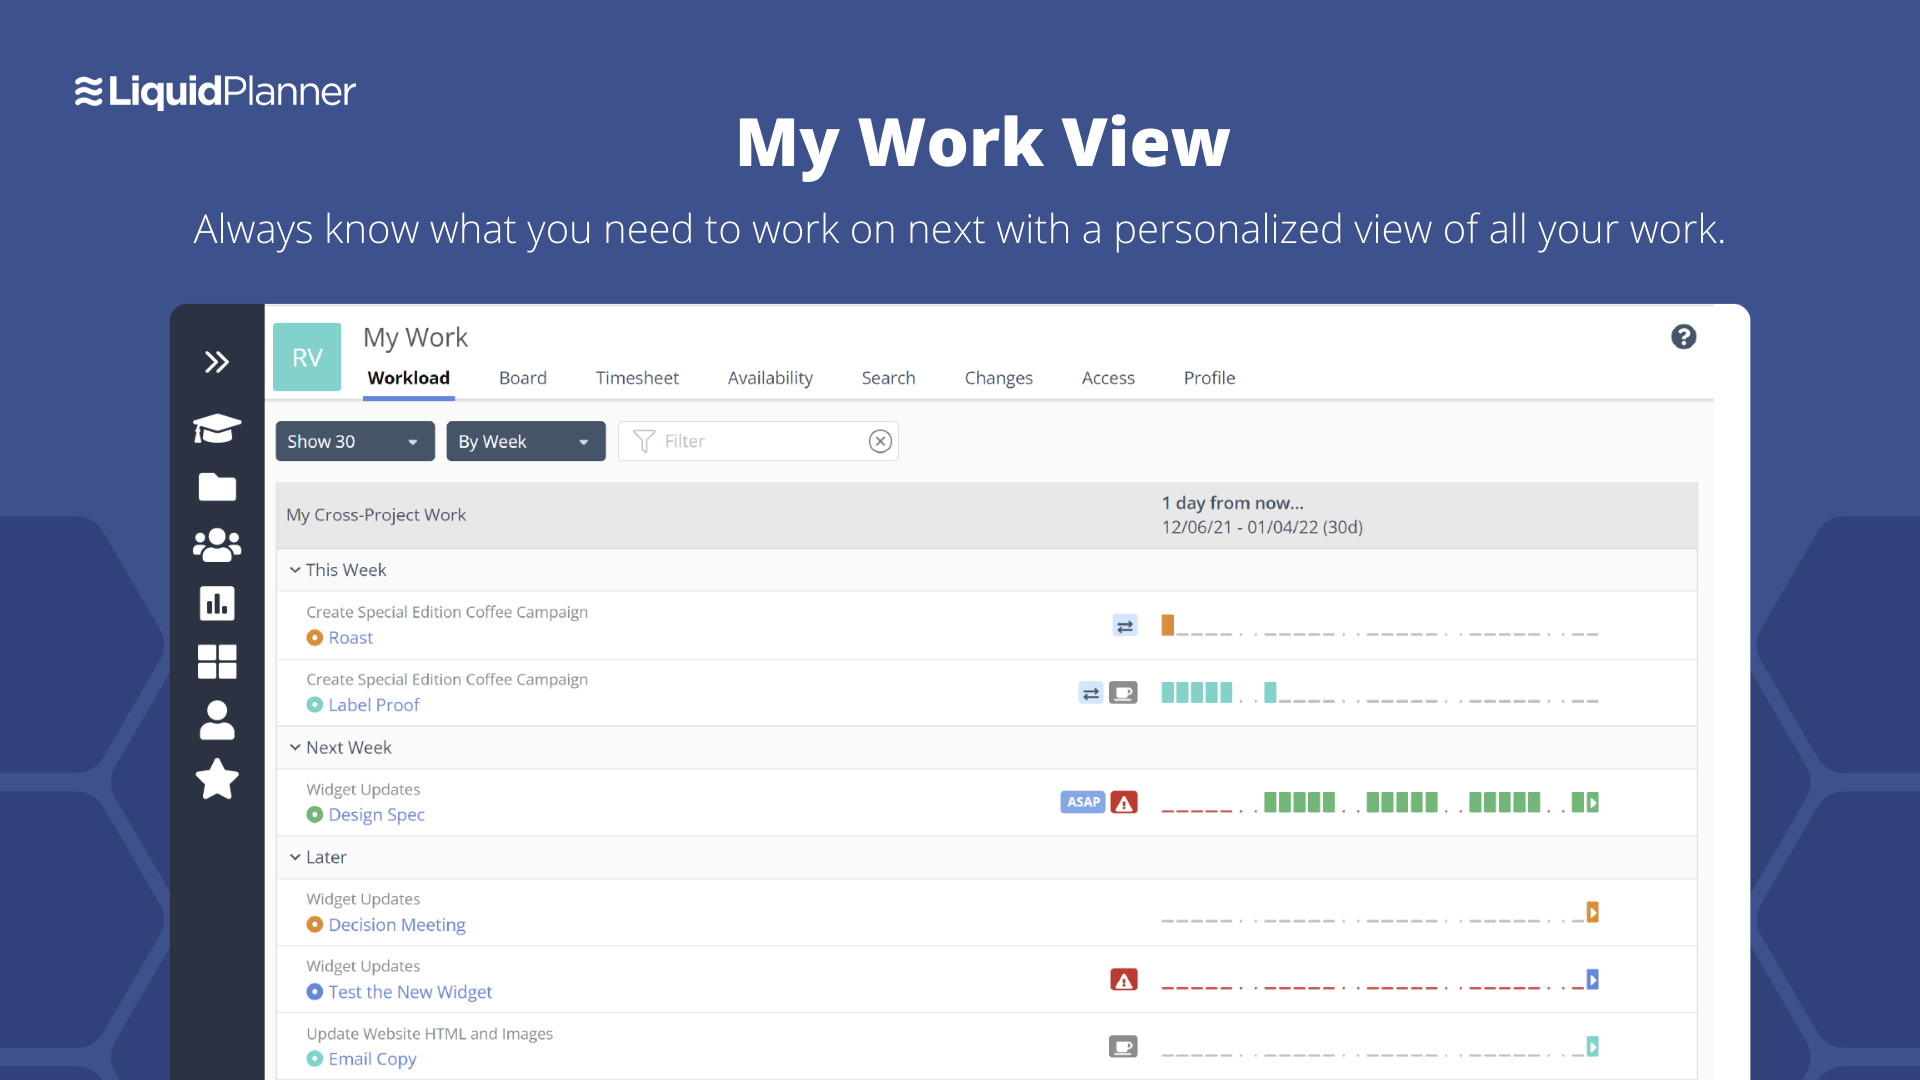 My Work View allows you to always know what you need to work on next so you're never guessing what the priority is for you. This is a personalized view of all your project work. This view allows you to understand your workload and balance accordingly.